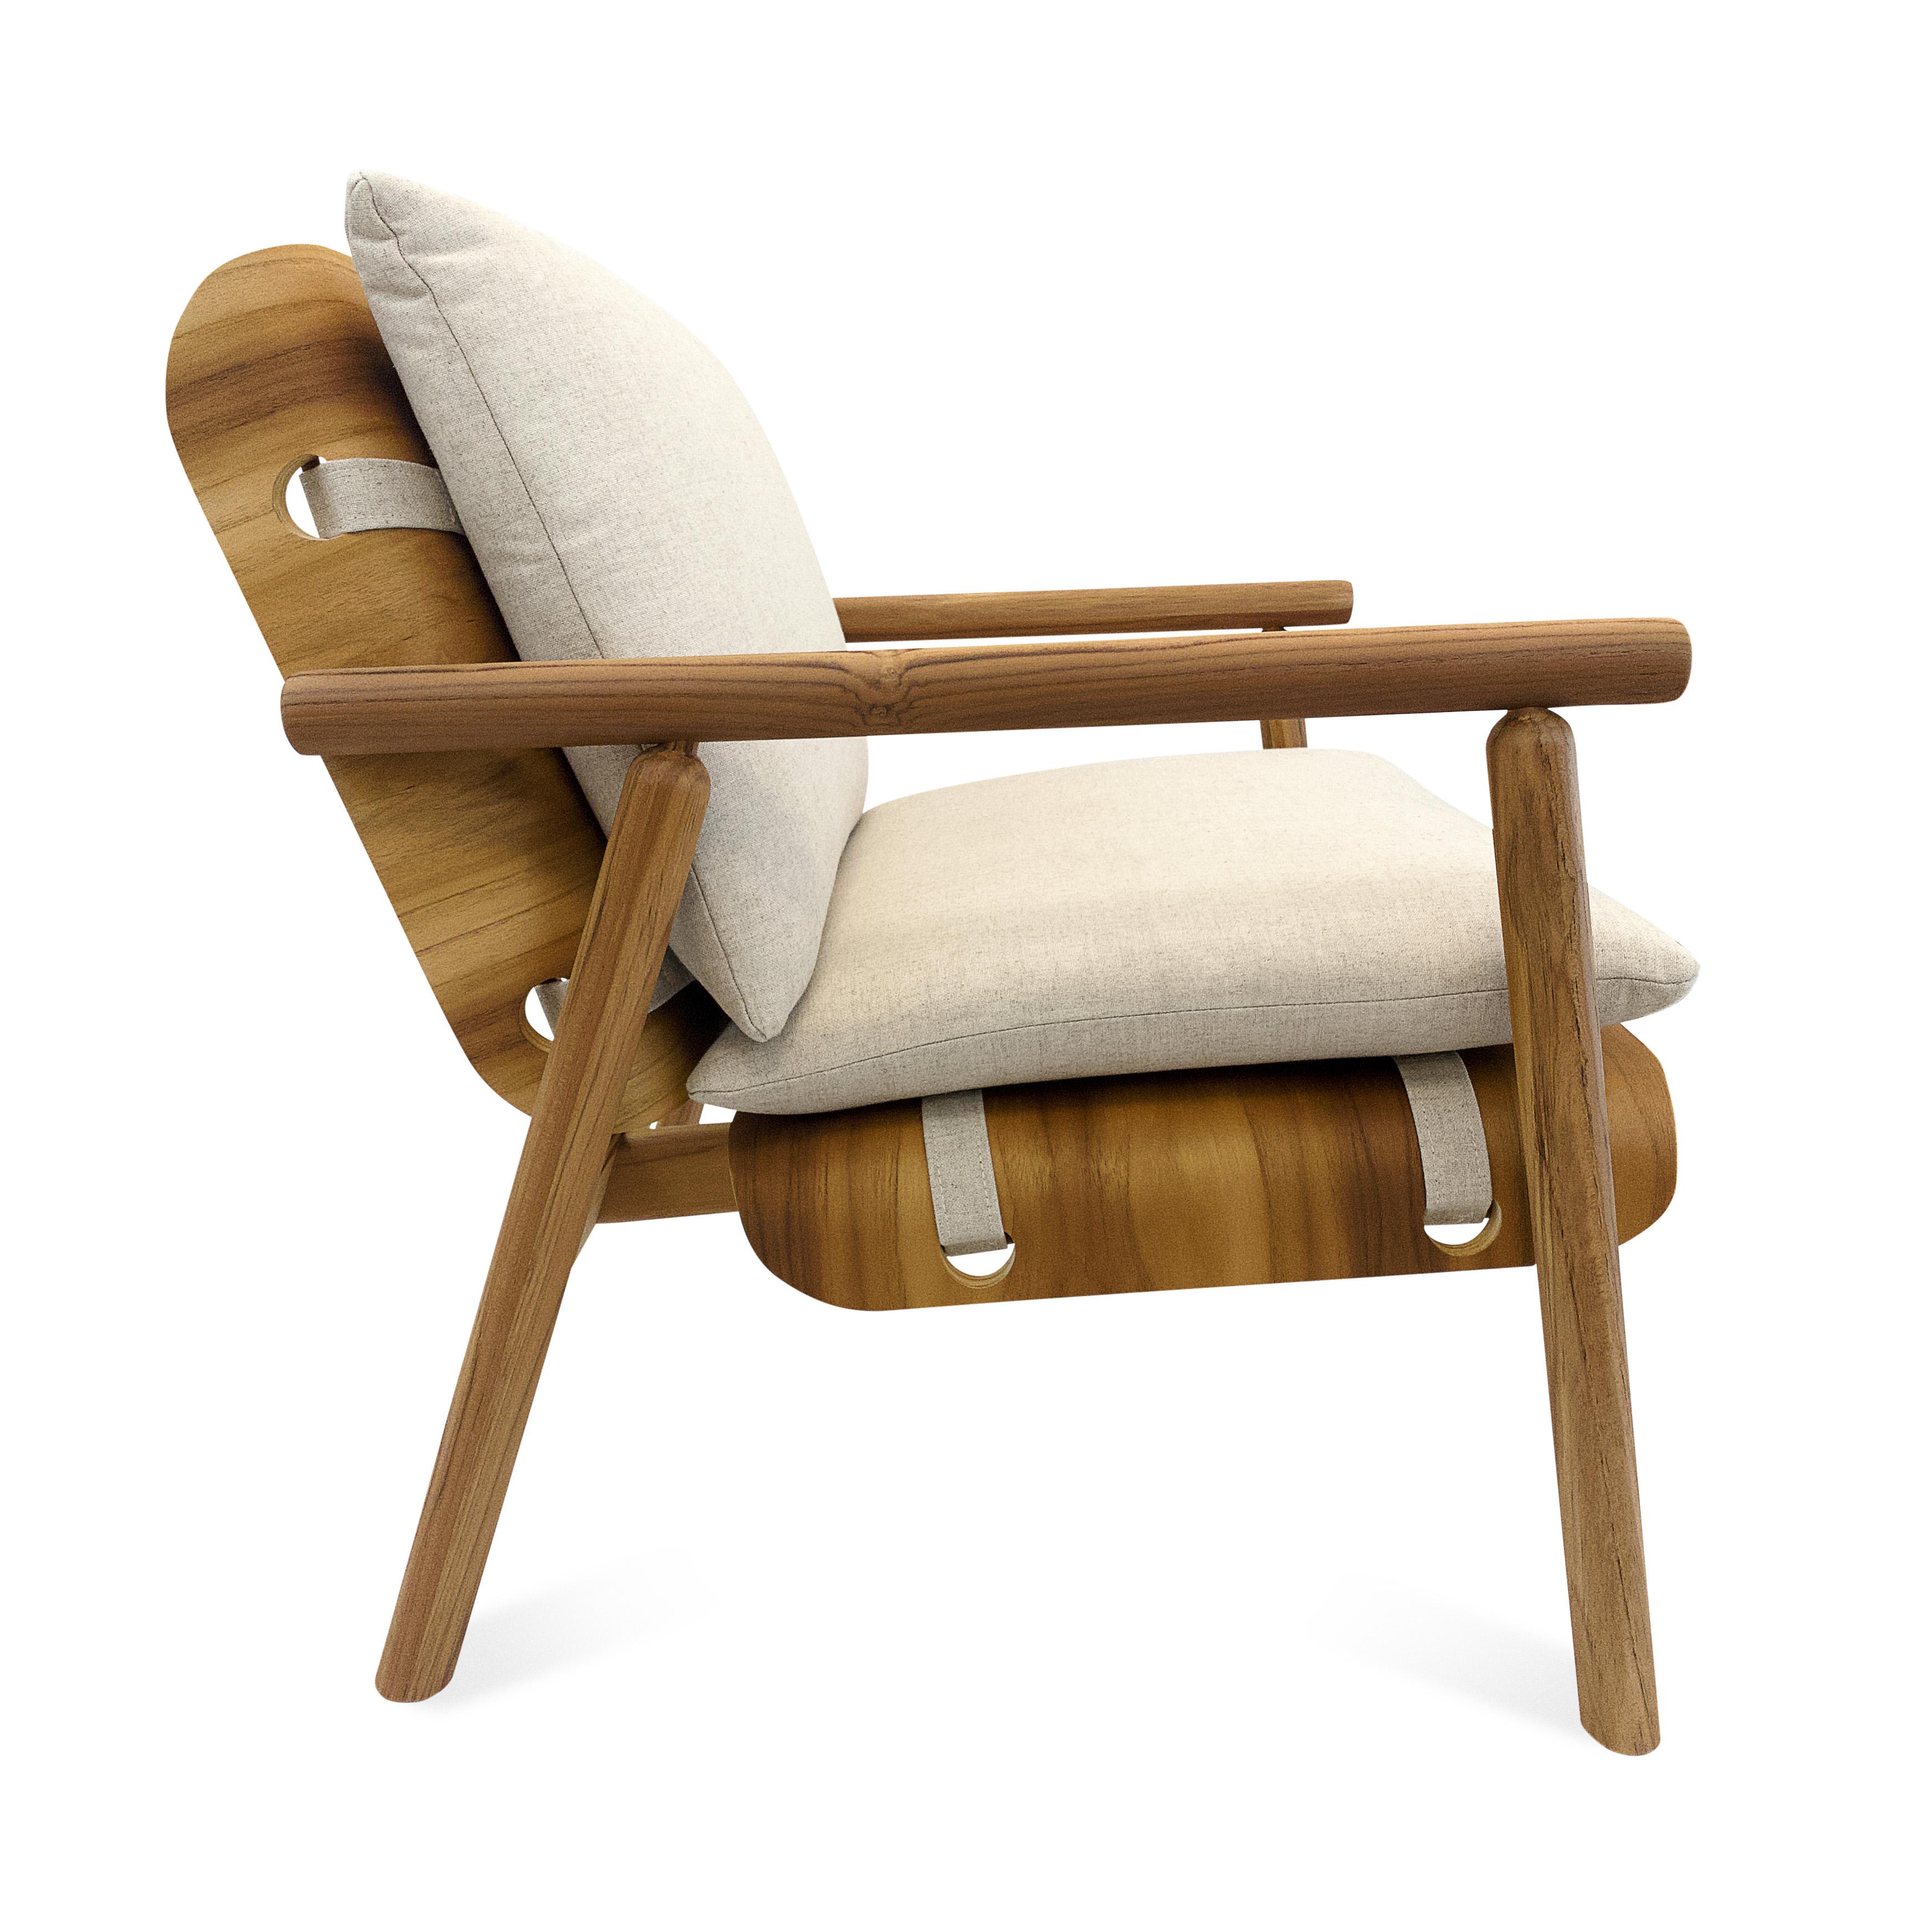 Tai Armchair in Teak Wood Finish with Light Beige Fabric Cushions In New Condition For Sale In Miami, FL